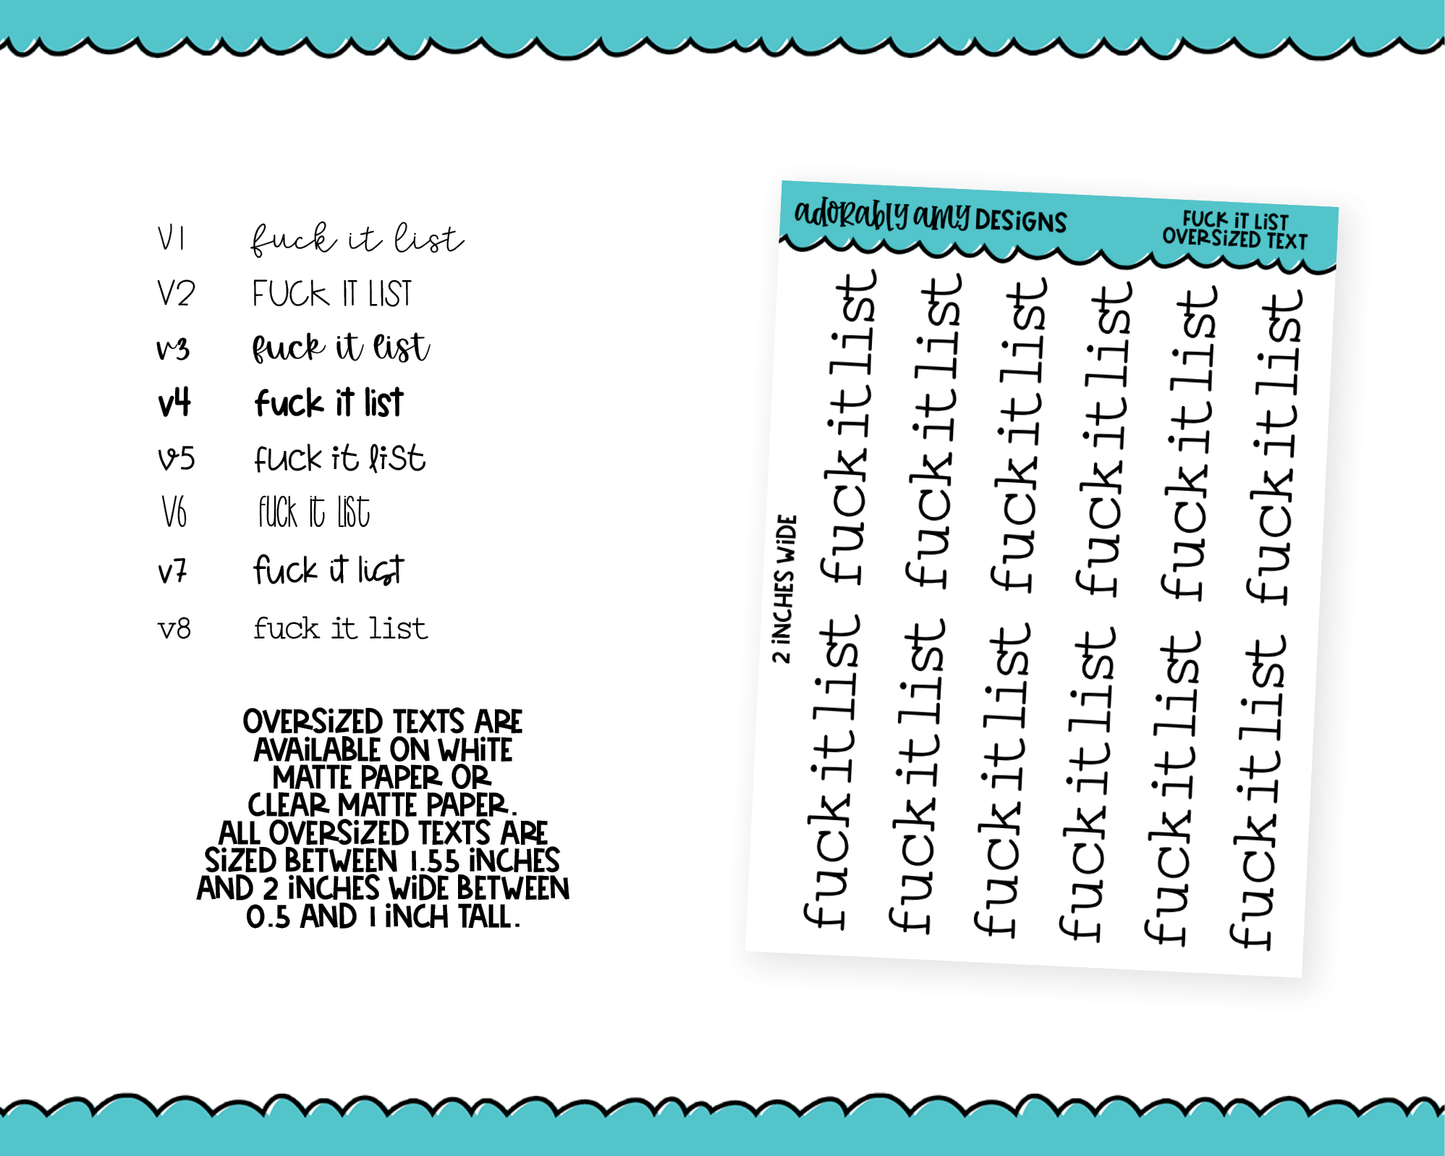 Oversized Text - Fuck It List Large Text Planner Stickers